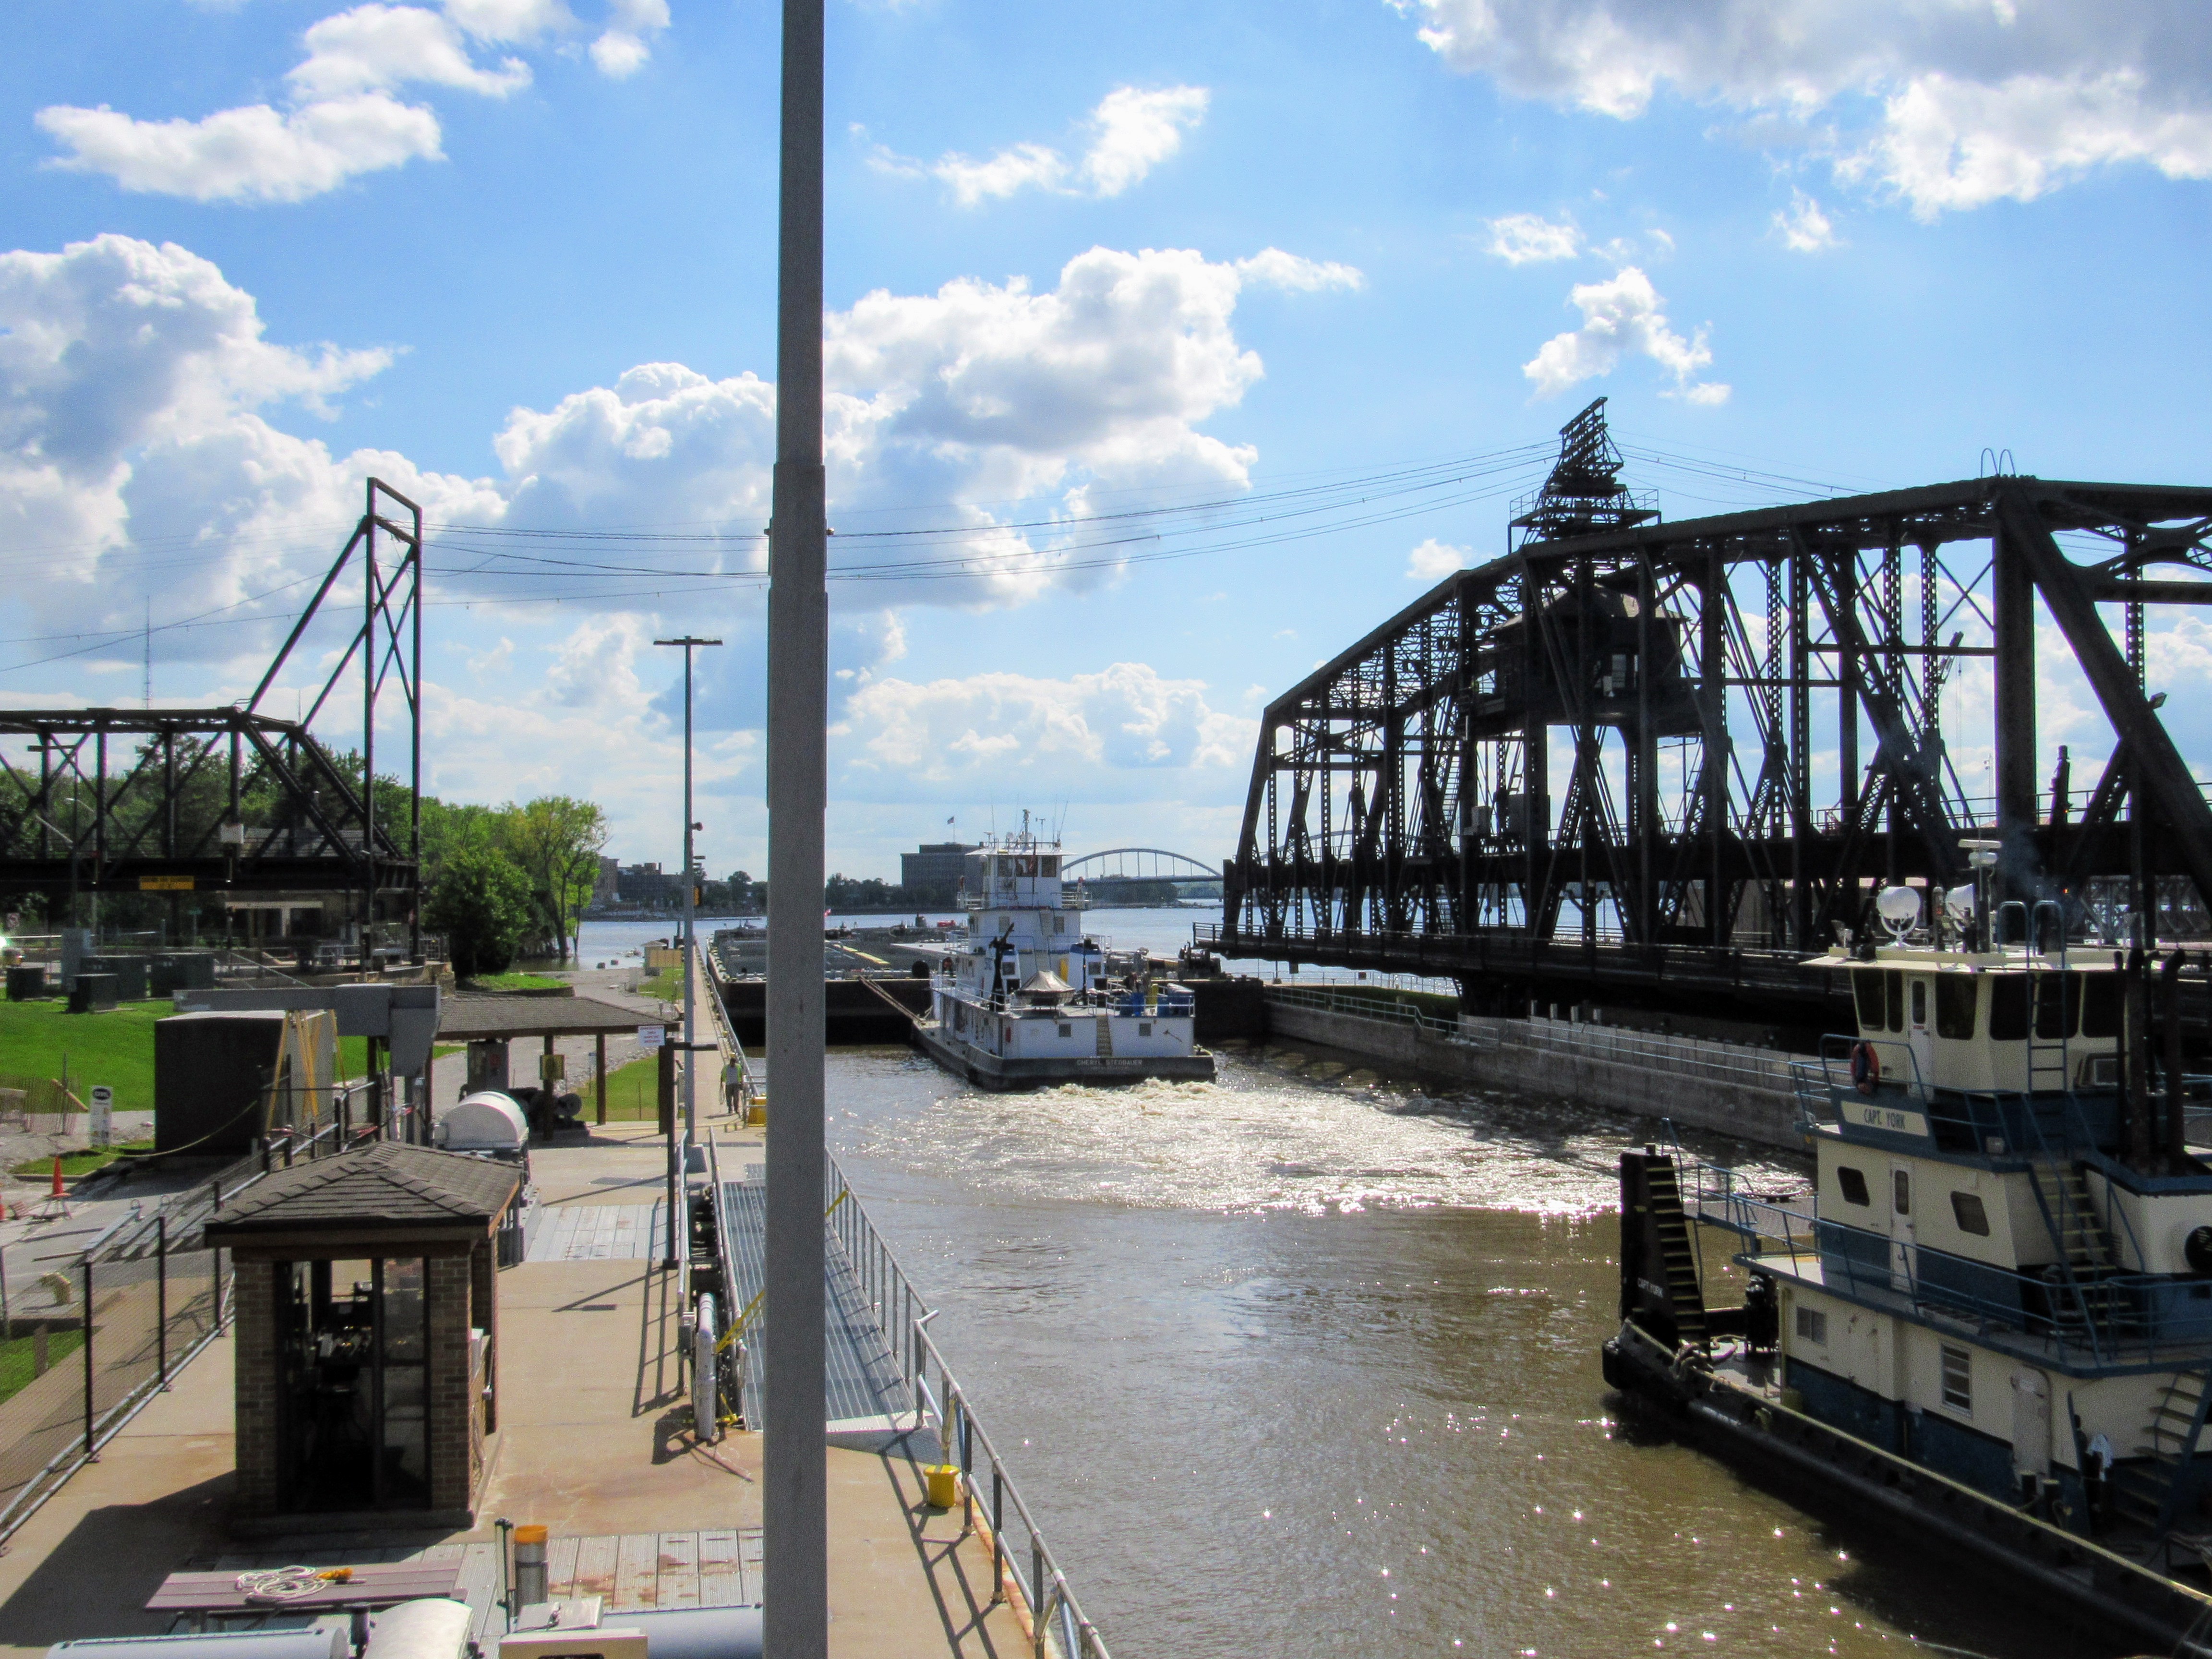 The Cheryl Stegbauer locking through at Lock and Dam #15 in Rock Island, Illinois. In operation since 1896, this section of the Government Bridge must swing open for every tow that passes. The bridge also carries rail and auto traffic across the river. (Avery Gregurich)